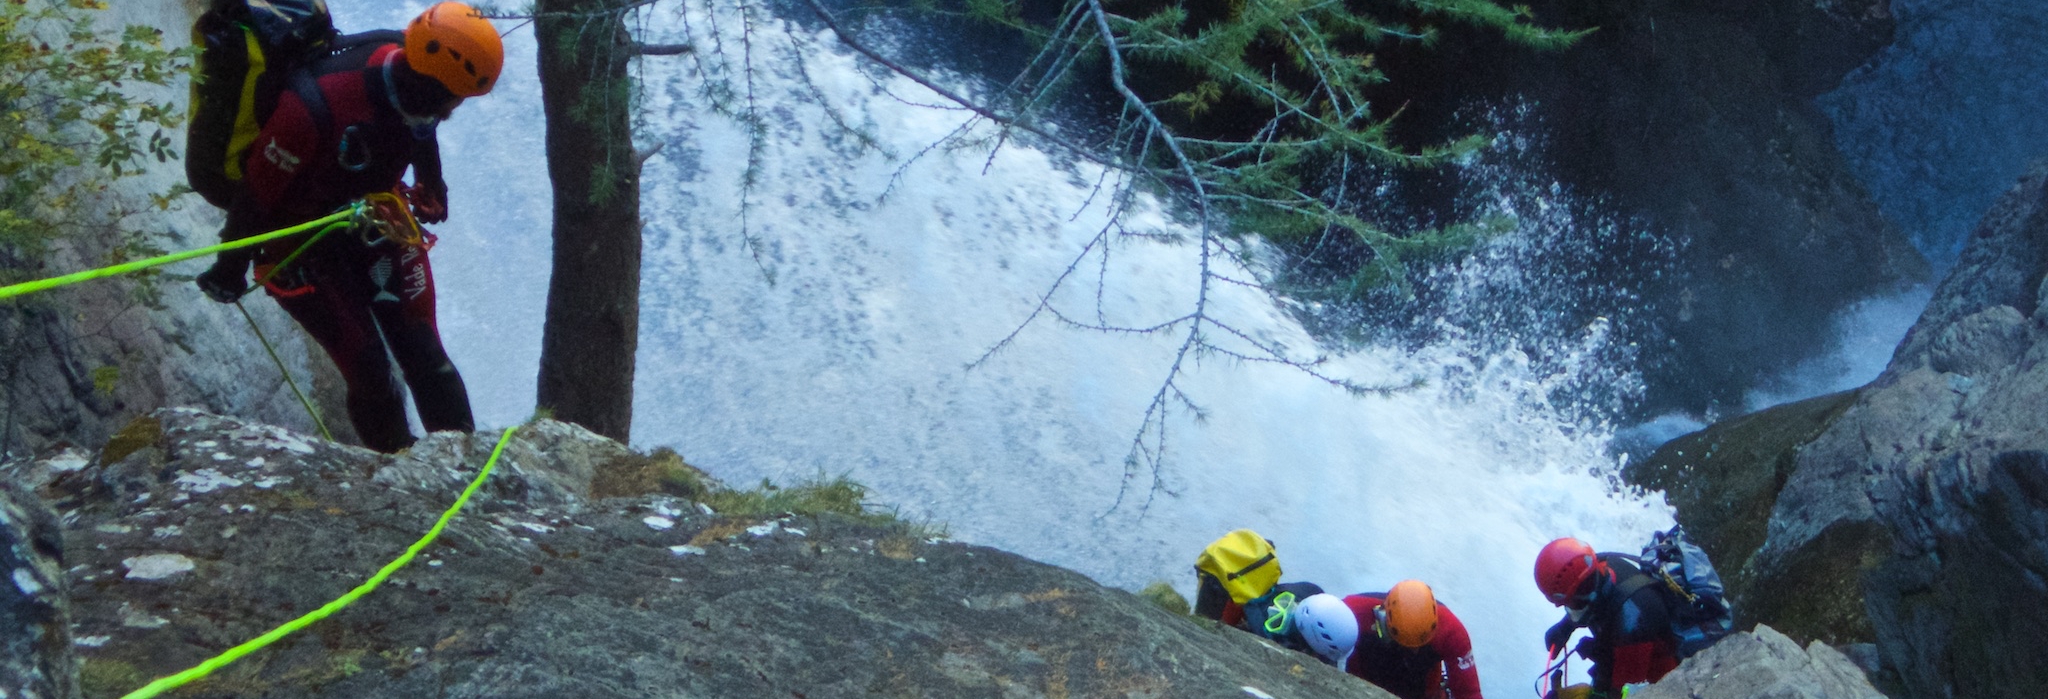 Canyoning Expert Tour Oules de Freissinieres